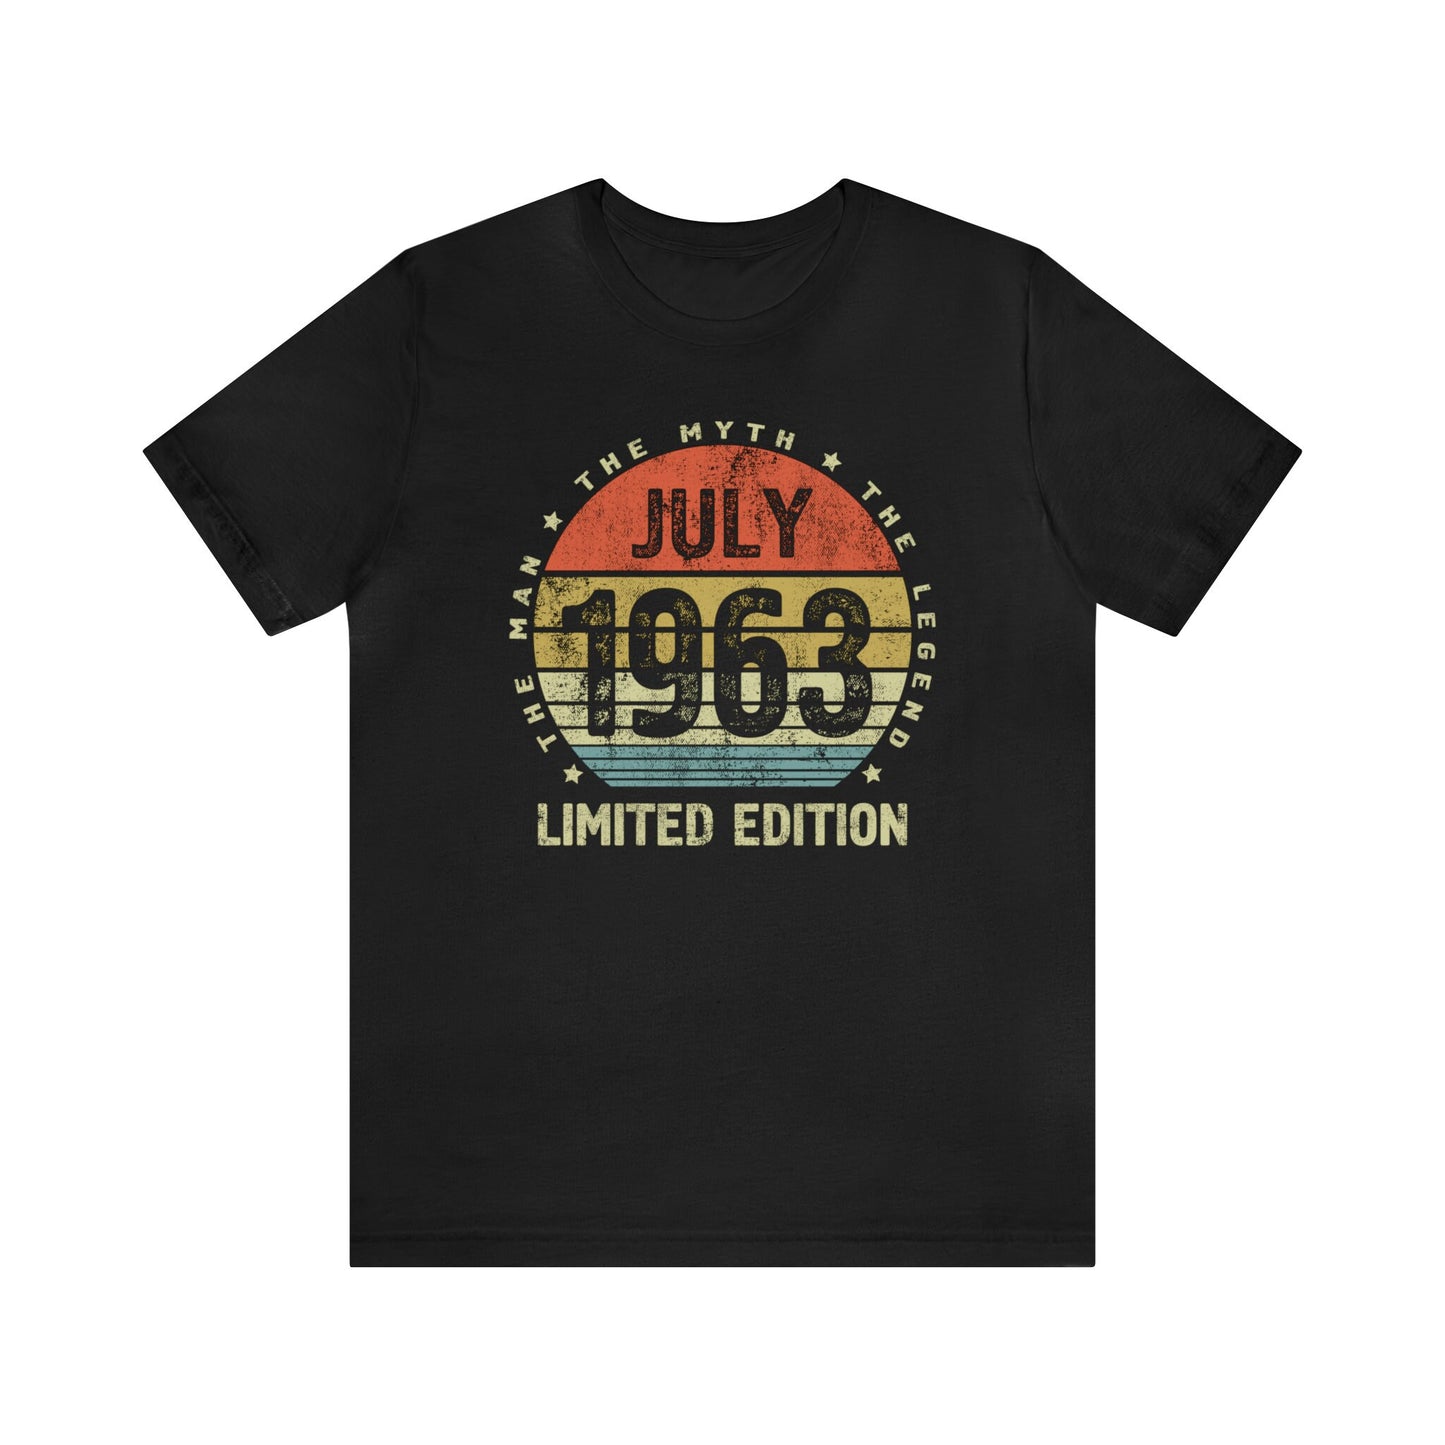 July 1963 birthday shirt for dad or husband,  Girt shirt for father or brother